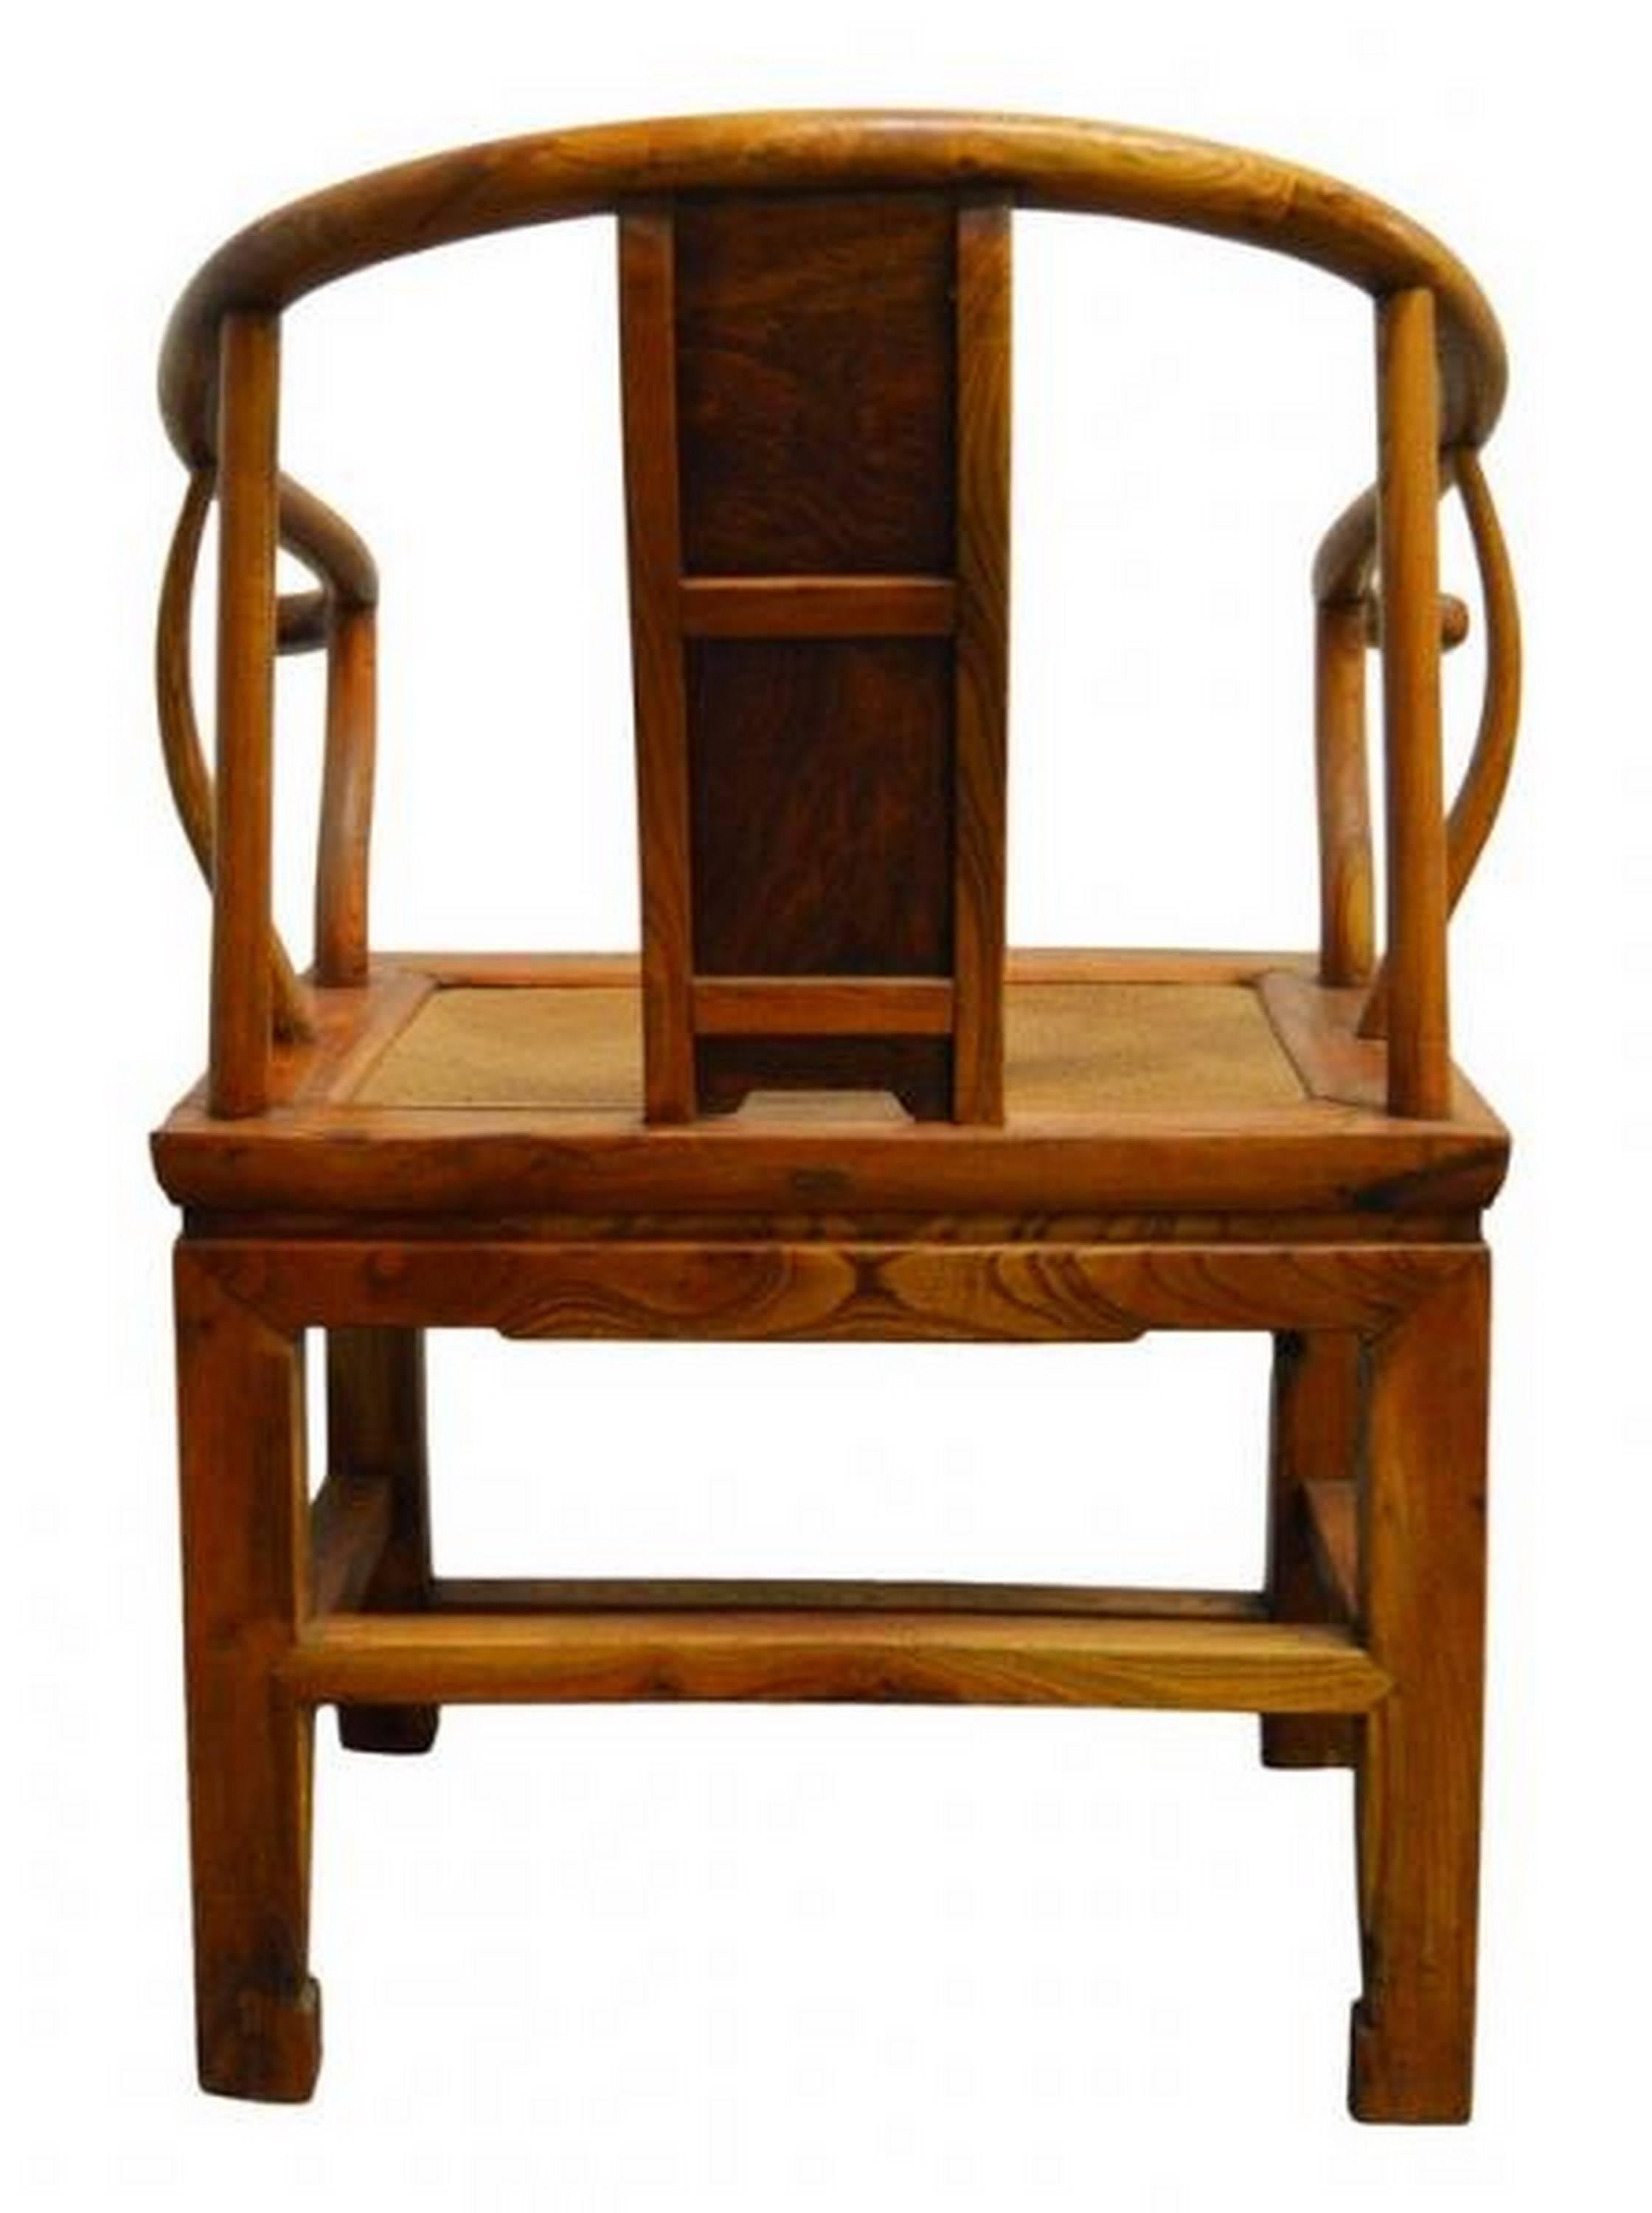 19th Century Chinese Light Brown Lacquered Horseshoe Back Chair with Rattan Seat 3